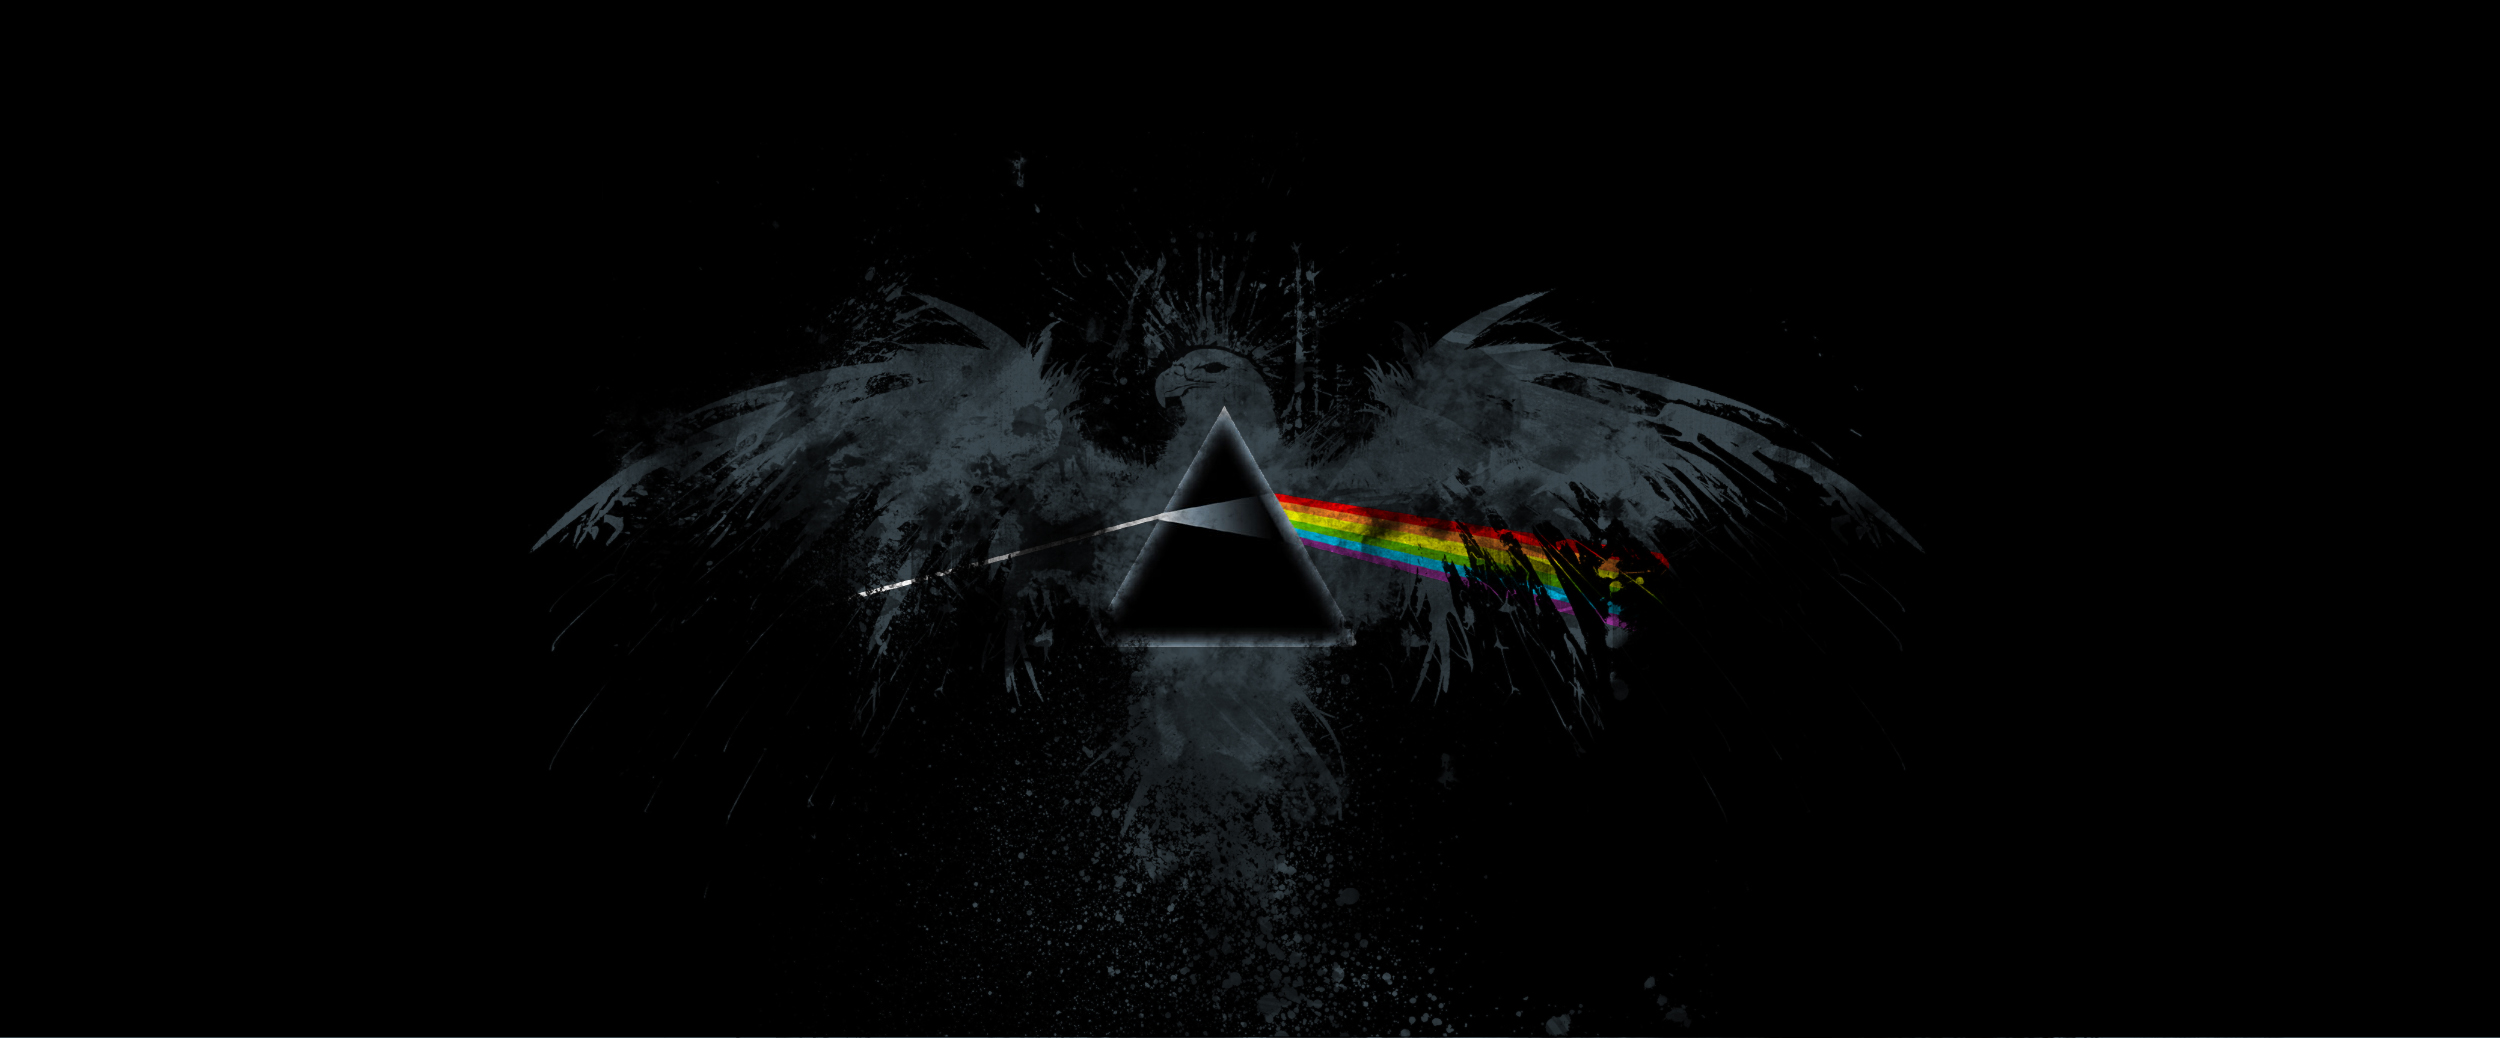 Free Download Pink Floyd Wallpaper Hd Photo Wallpapers Auto